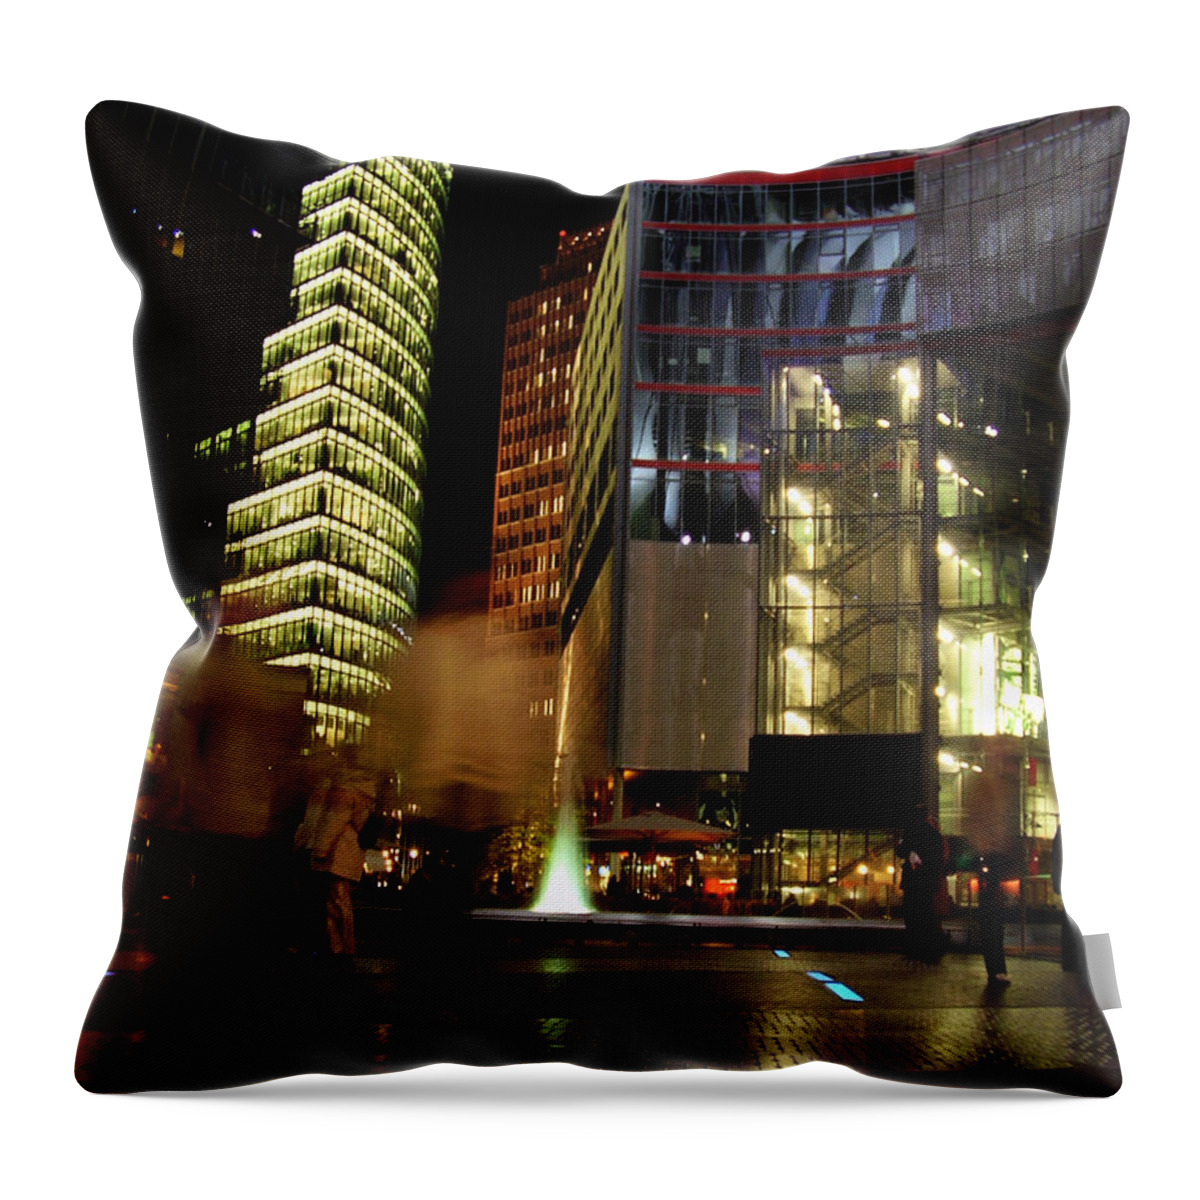 Sony Center Throw Pillow featuring the photograph Sony Center by Flavia Westerwelle